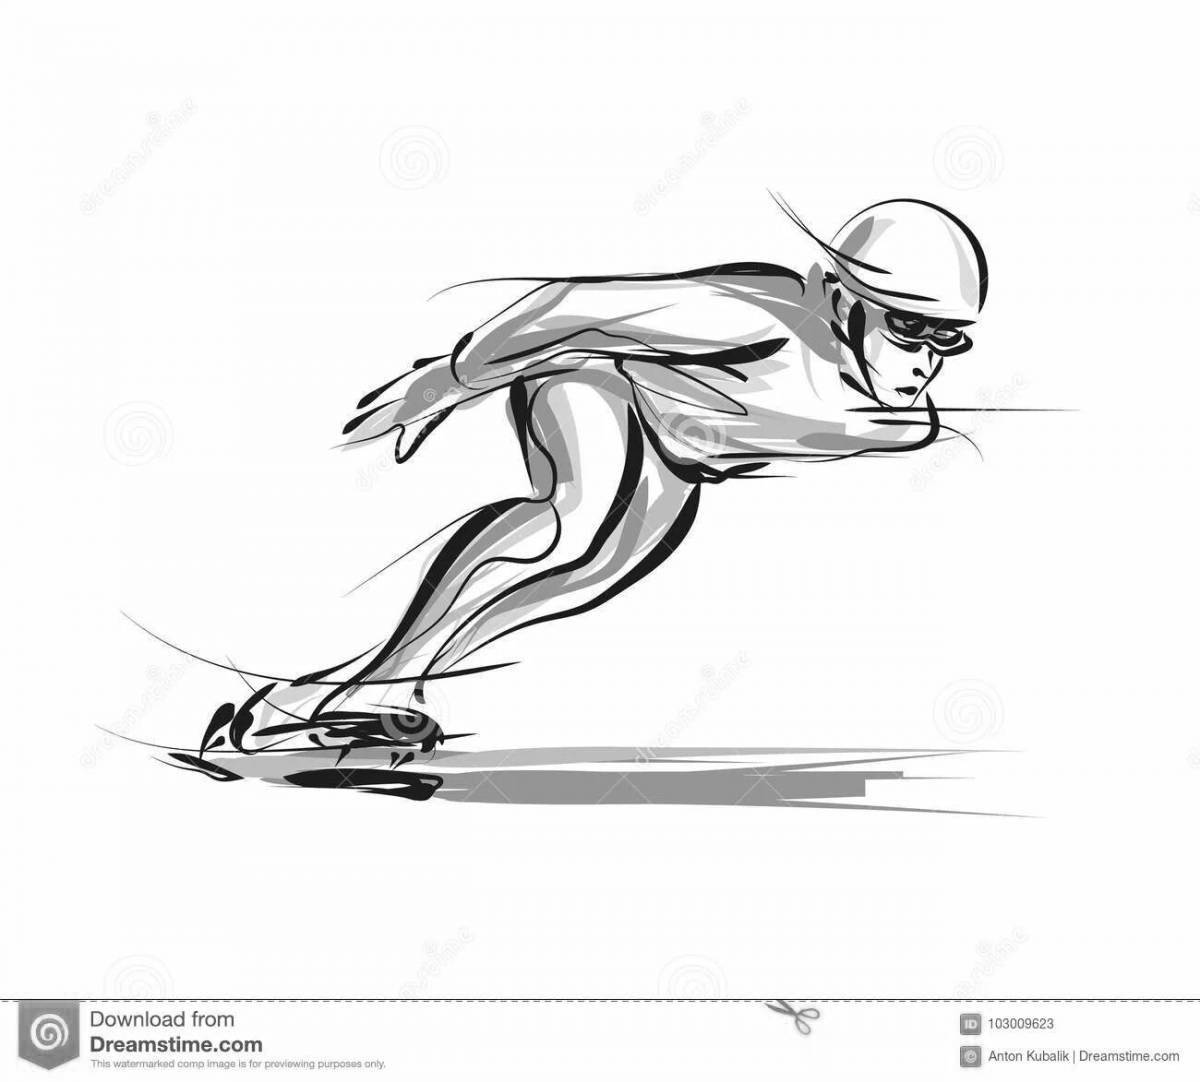 Animated figure skater coloring page